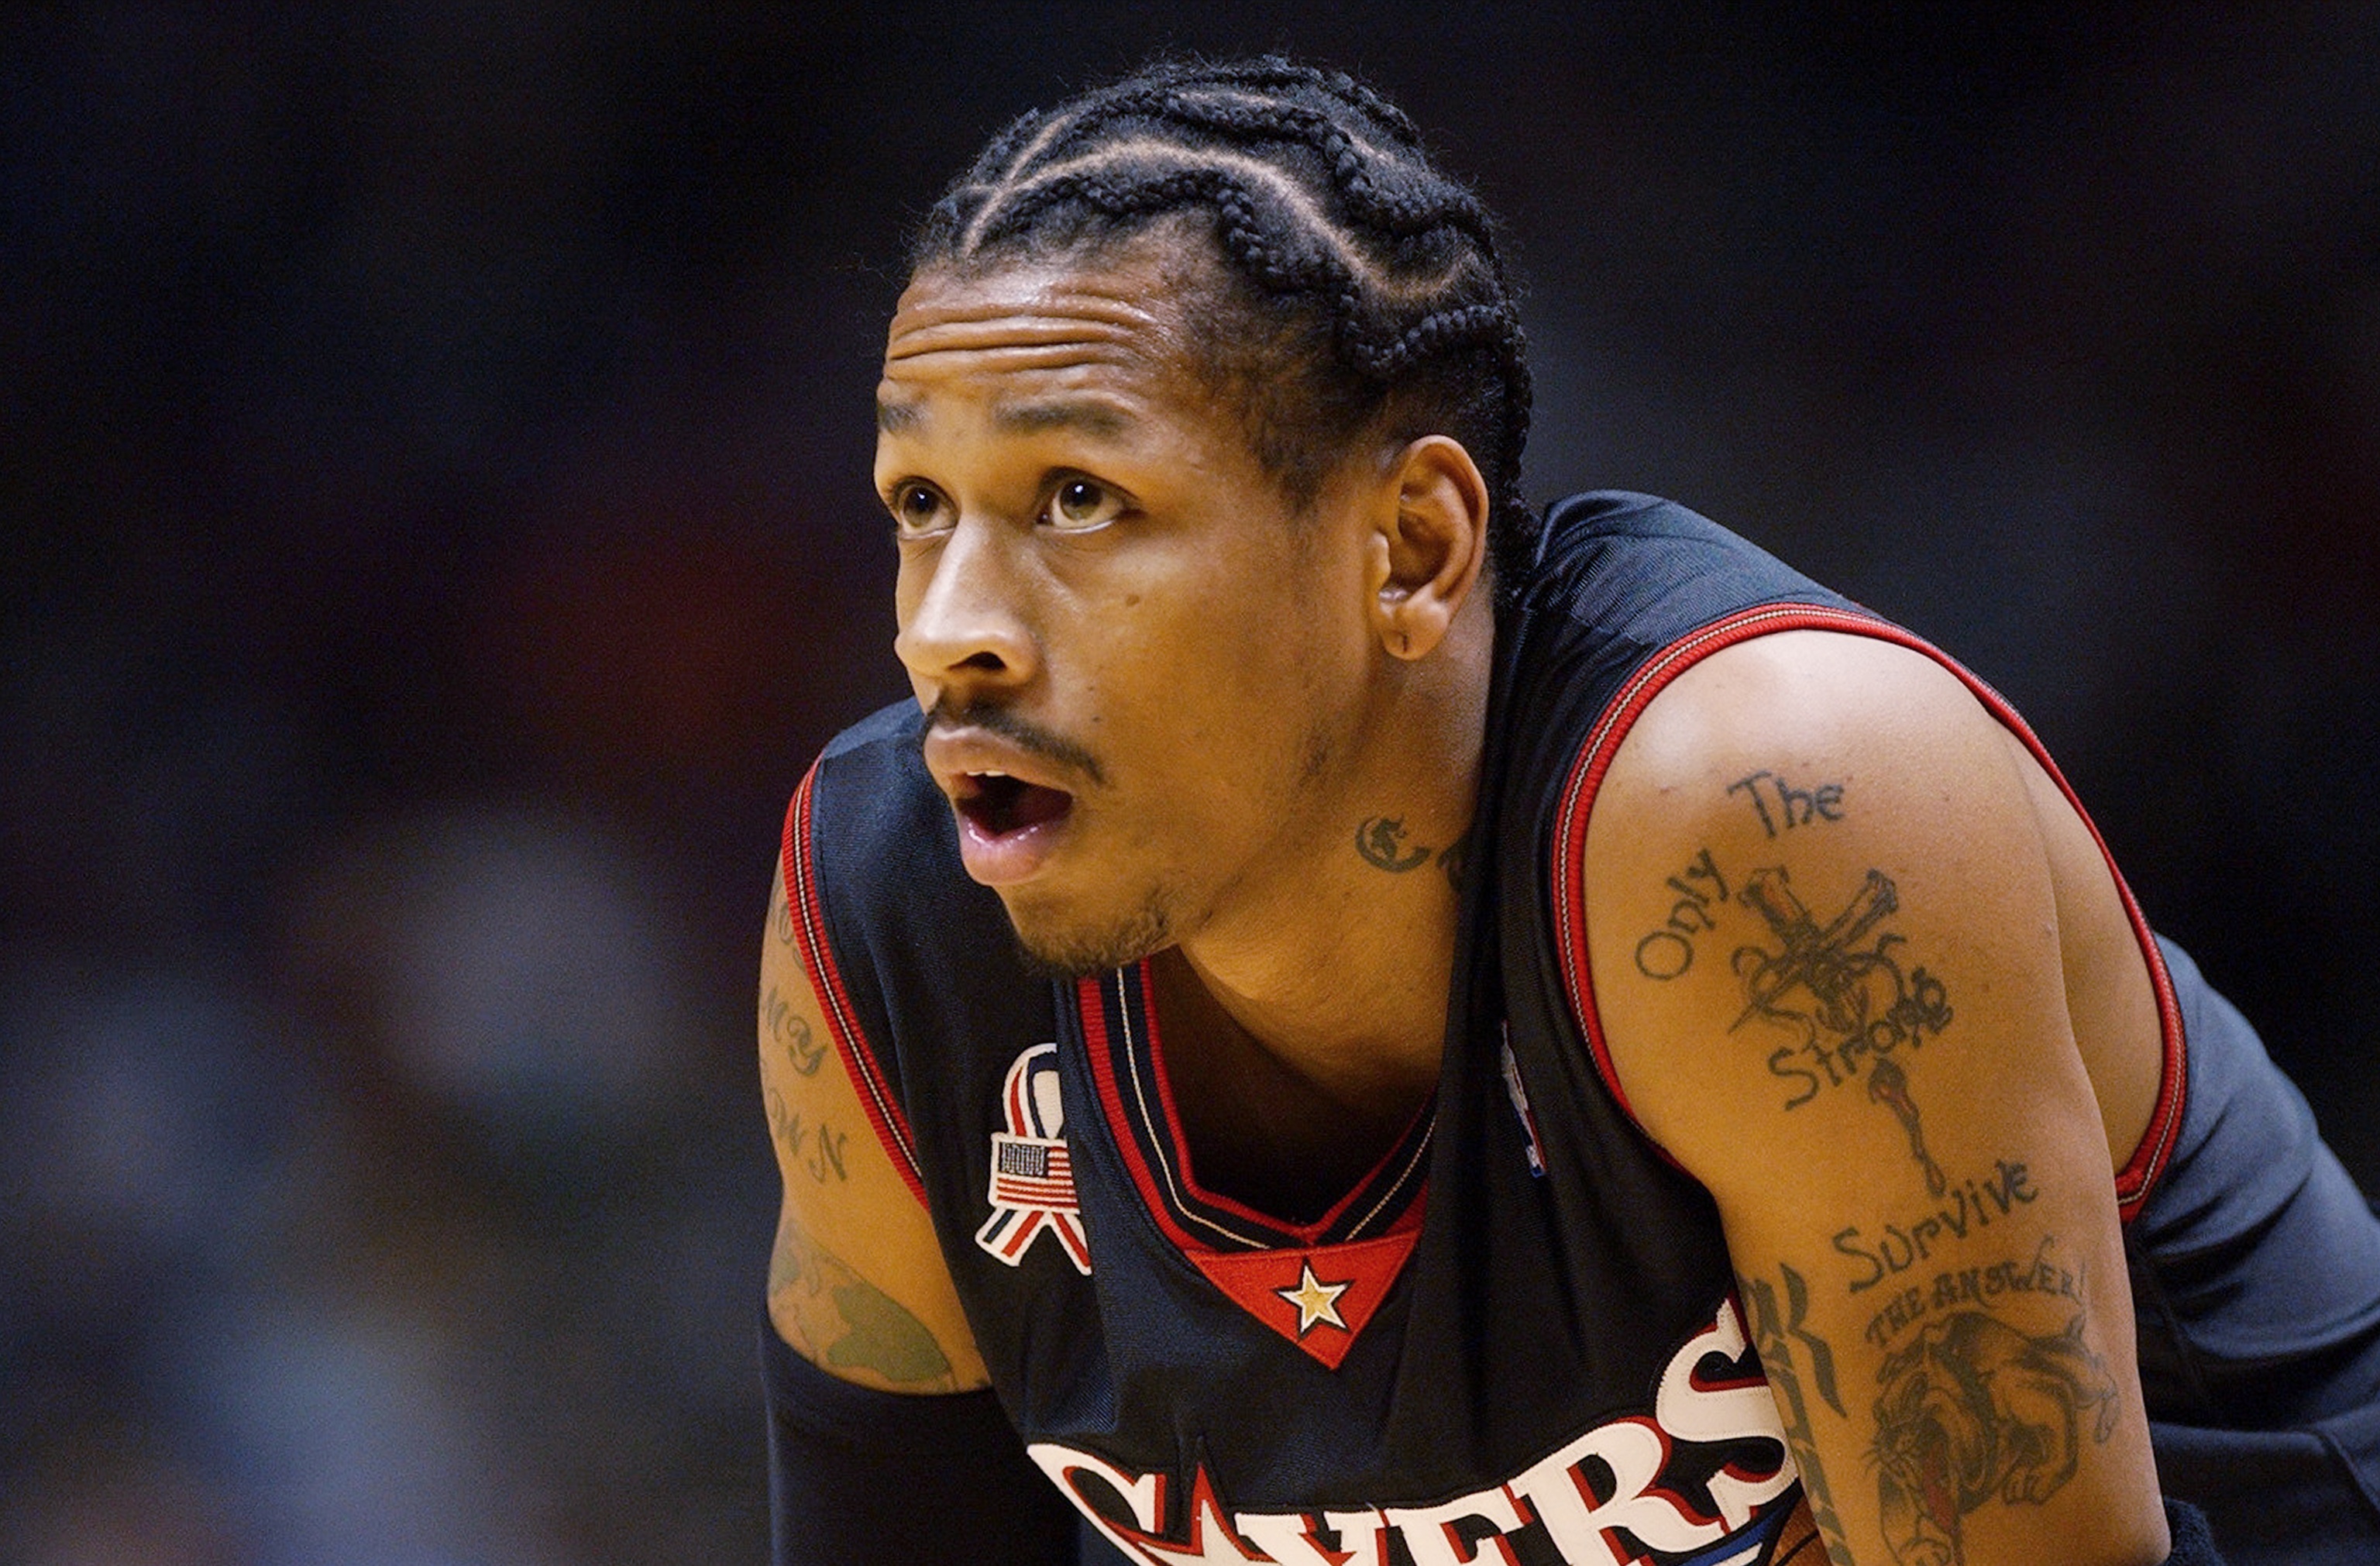 Allen Iverson on the court during an NBA game